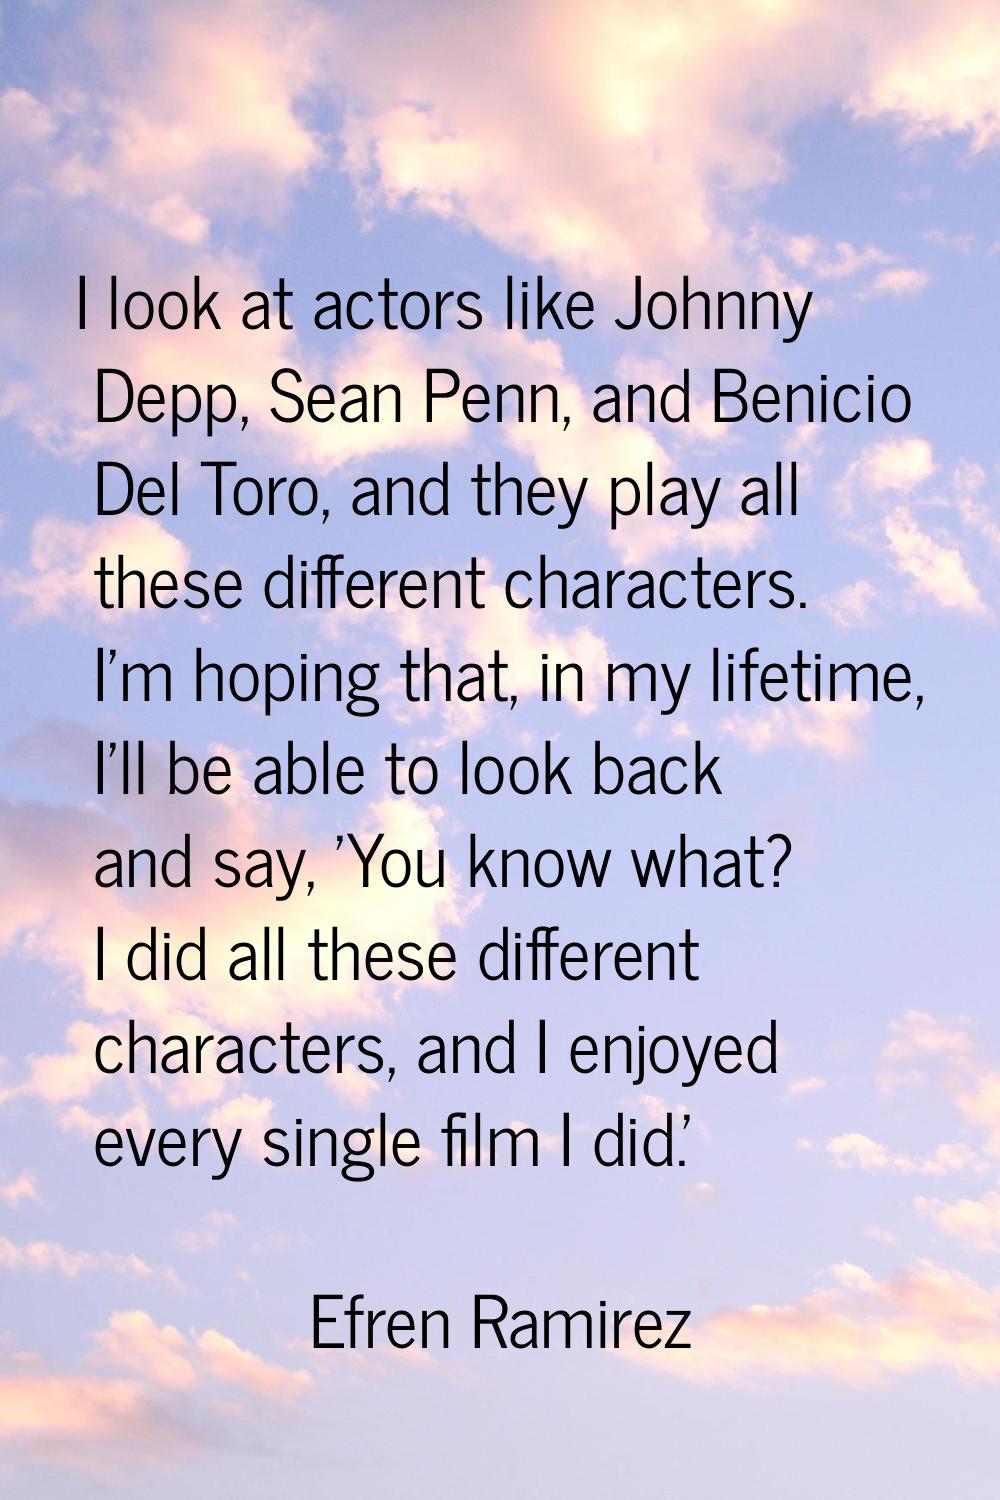 I look at actors like Johnny Depp, Sean Penn, and Benicio Del Toro, and they play all these differe